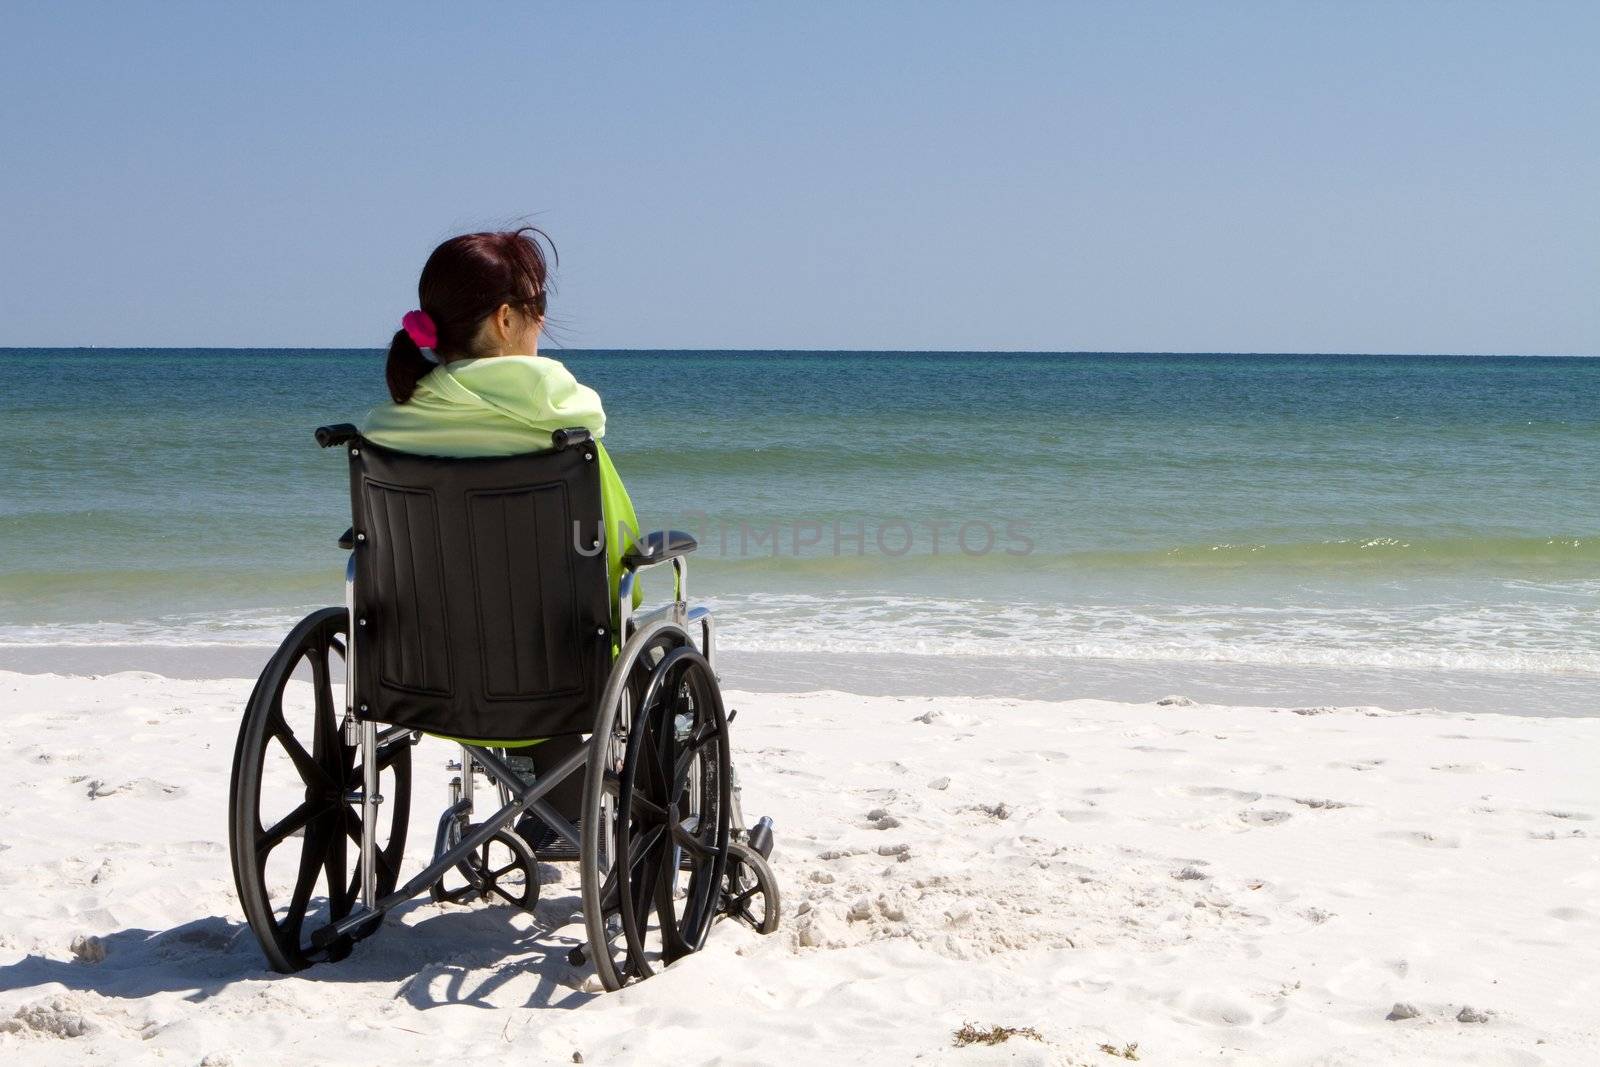 Disabled woman sits alone in a wheelchair on a sandy beach watching the ocean waves.